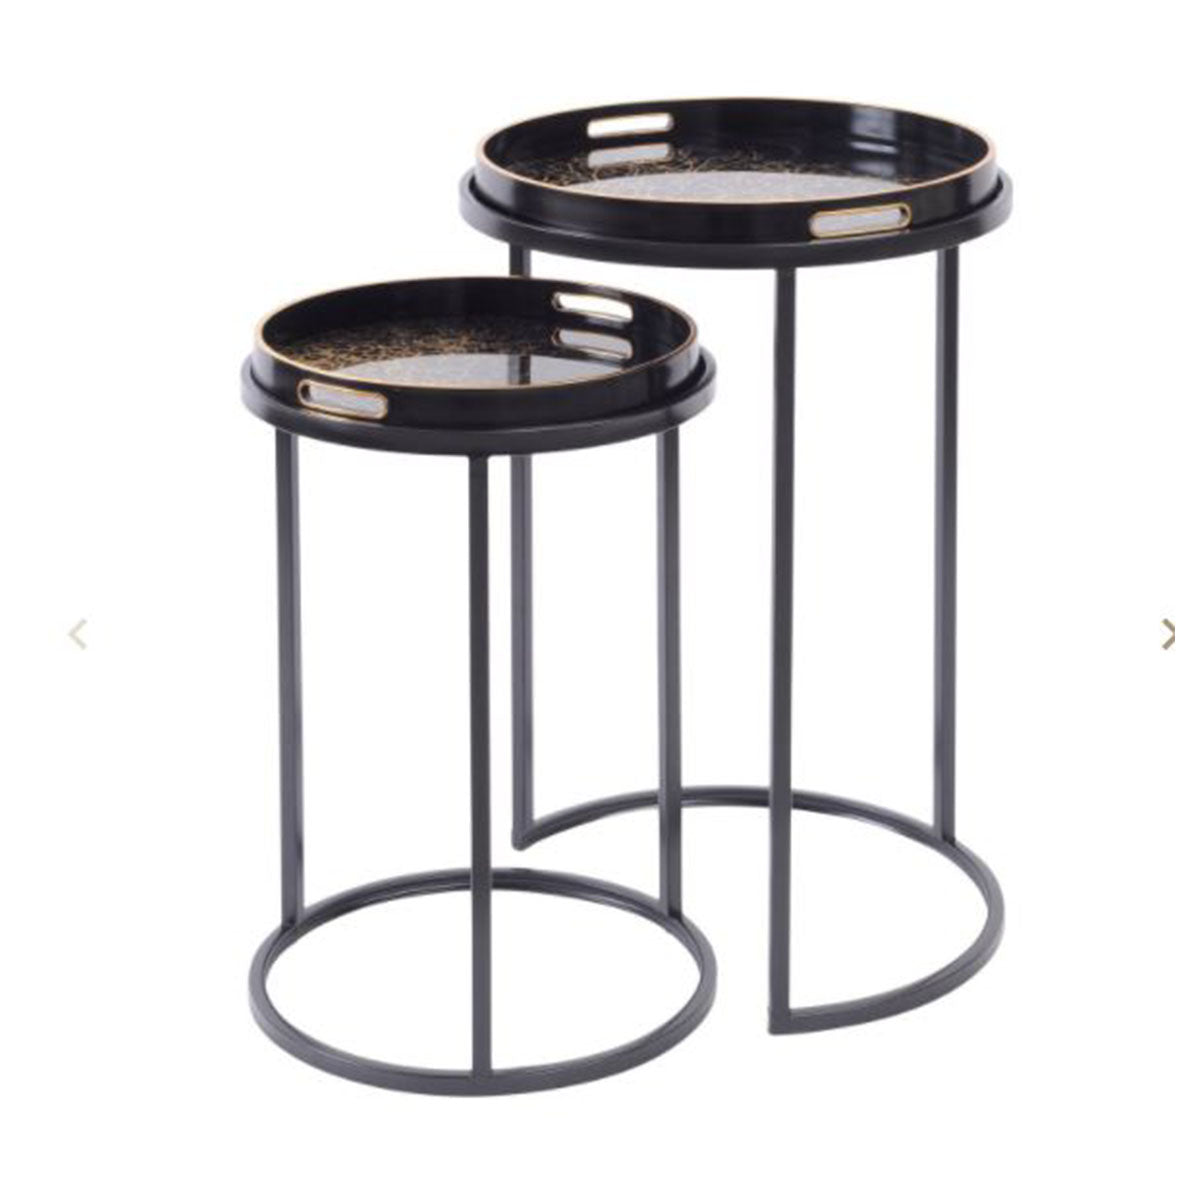 Coral Design Nesting Side Tables Set of Two Tray